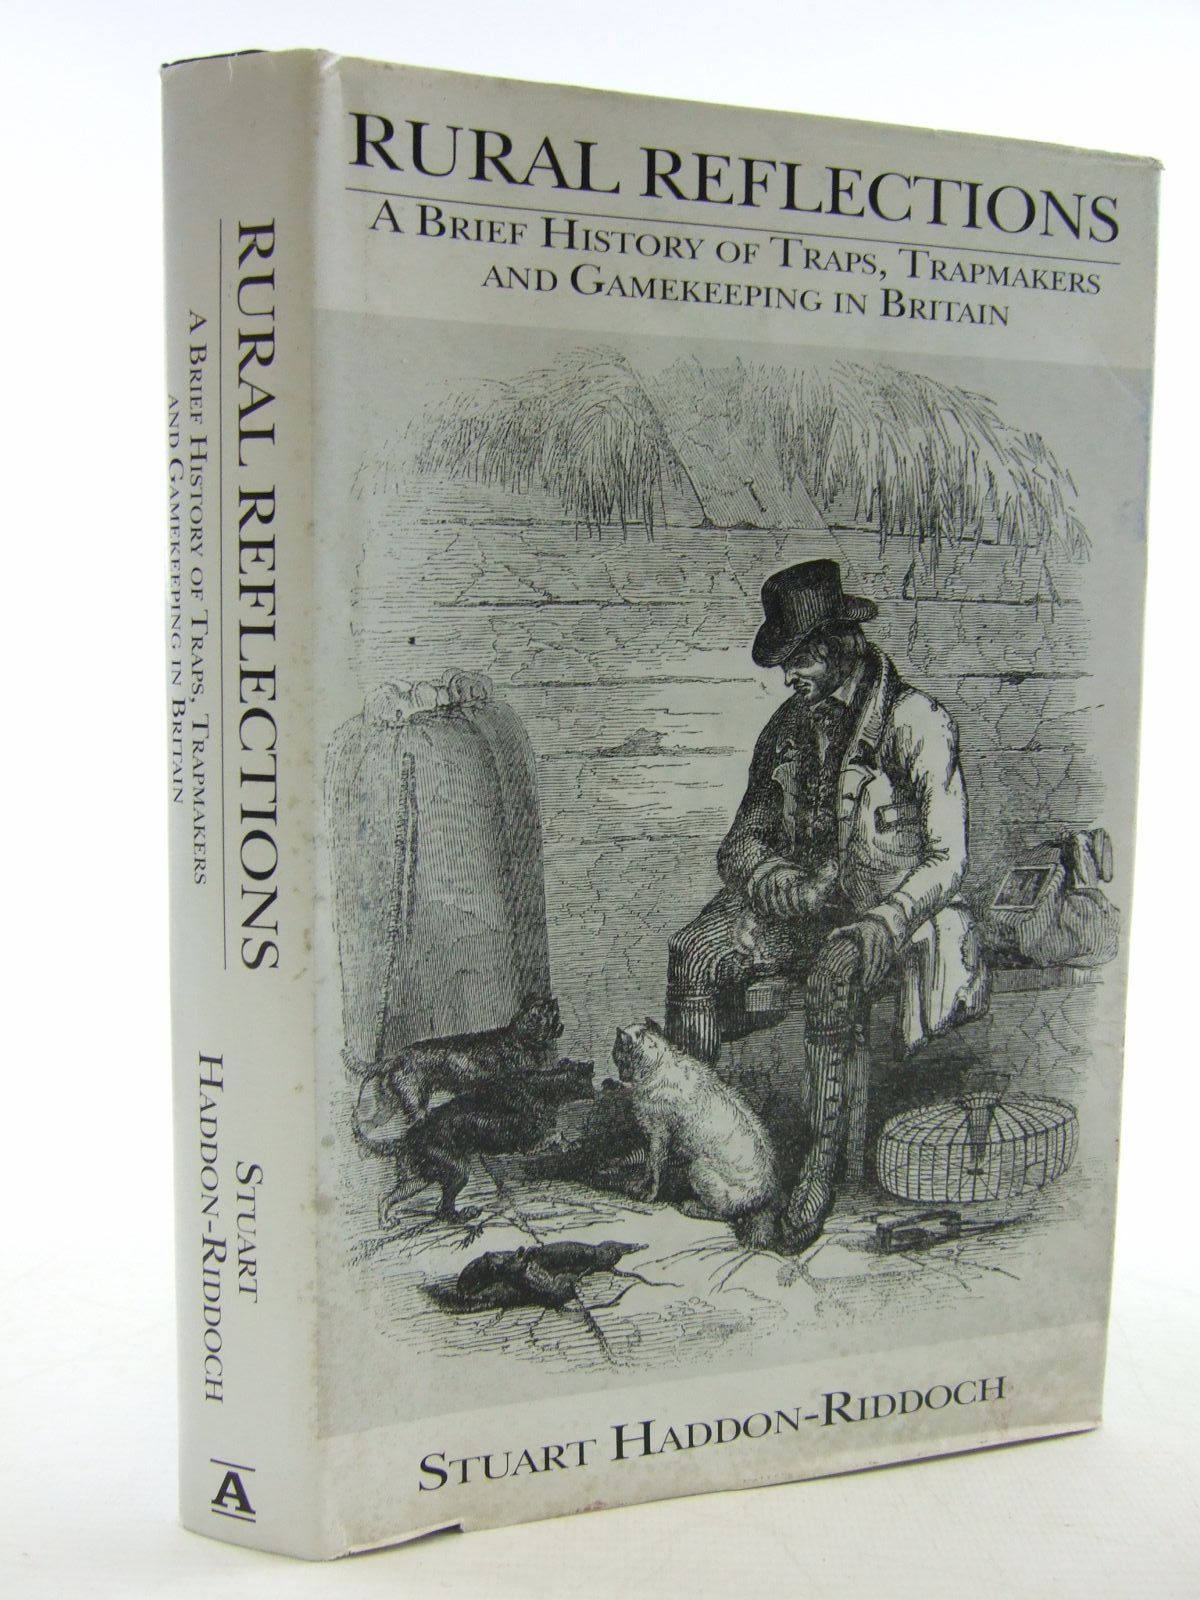 Photo of RURAL REFLECTIONS A BRIEF HISTORY OF TRAPS, TRAPMAKING AND GAMEKEEPING IN BRITAIN written by Haddon-Riddoch, Stuart published by Argyll Publishing (STOCK CODE: 1707392)  for sale by Stella & Rose's Books